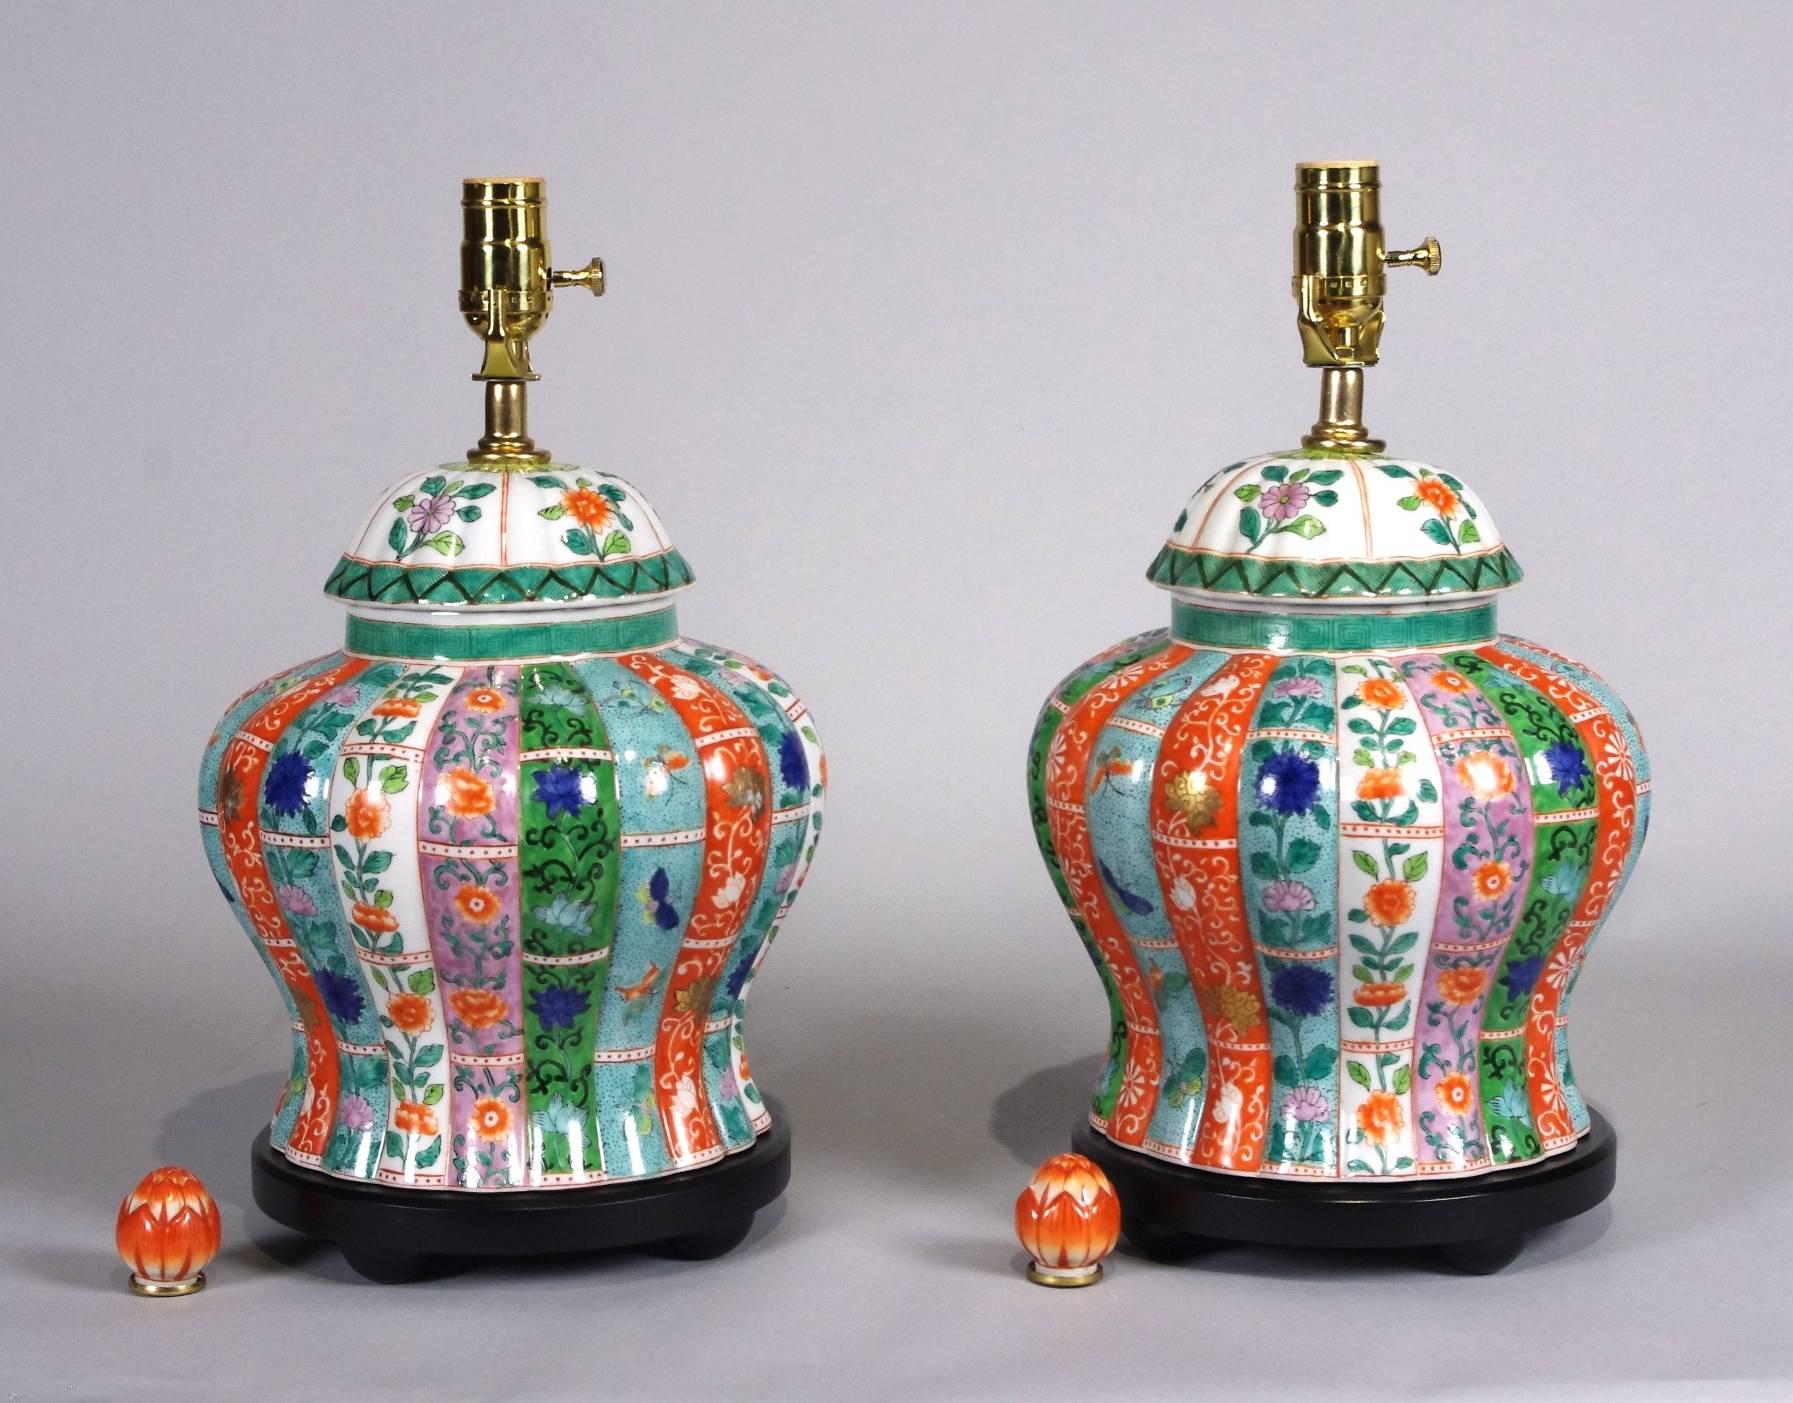 Pair of Chinese porcelain polychrome ginger jars mounted as lamps, each molded as bamboo and colorfully painted in shades of orange, green, blue, turquoise and lavender, with artichoke finials.

Lamps are 12